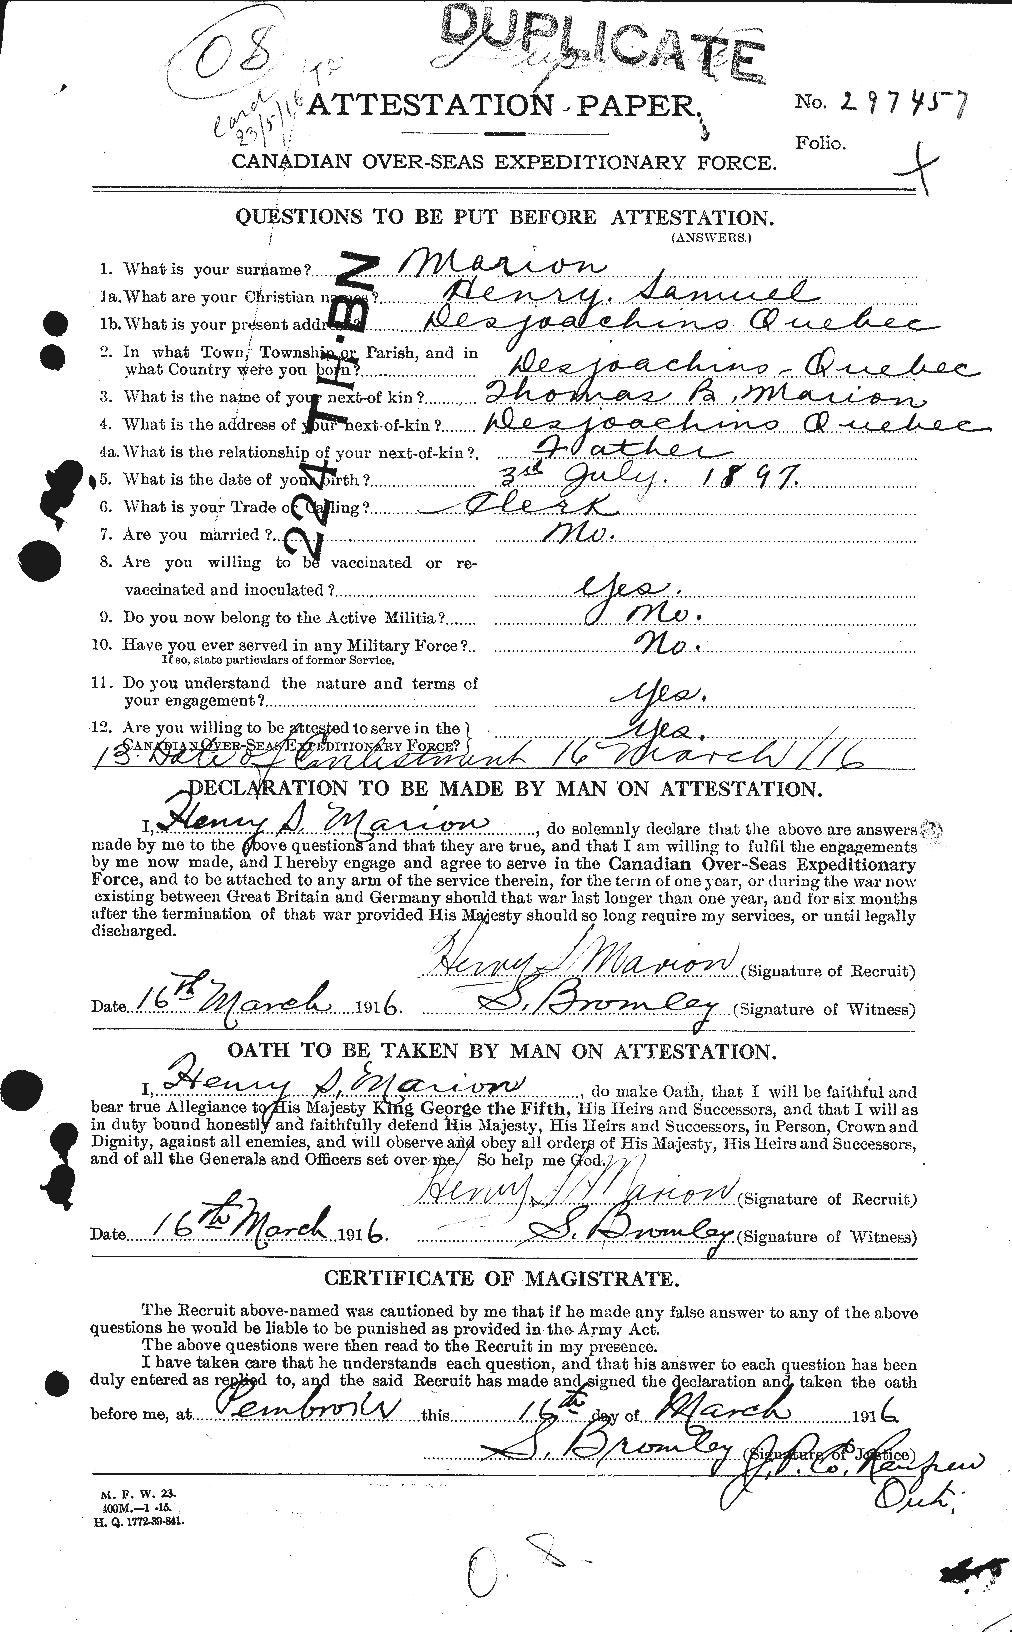 Personnel Records of the First World War - CEF 474430a